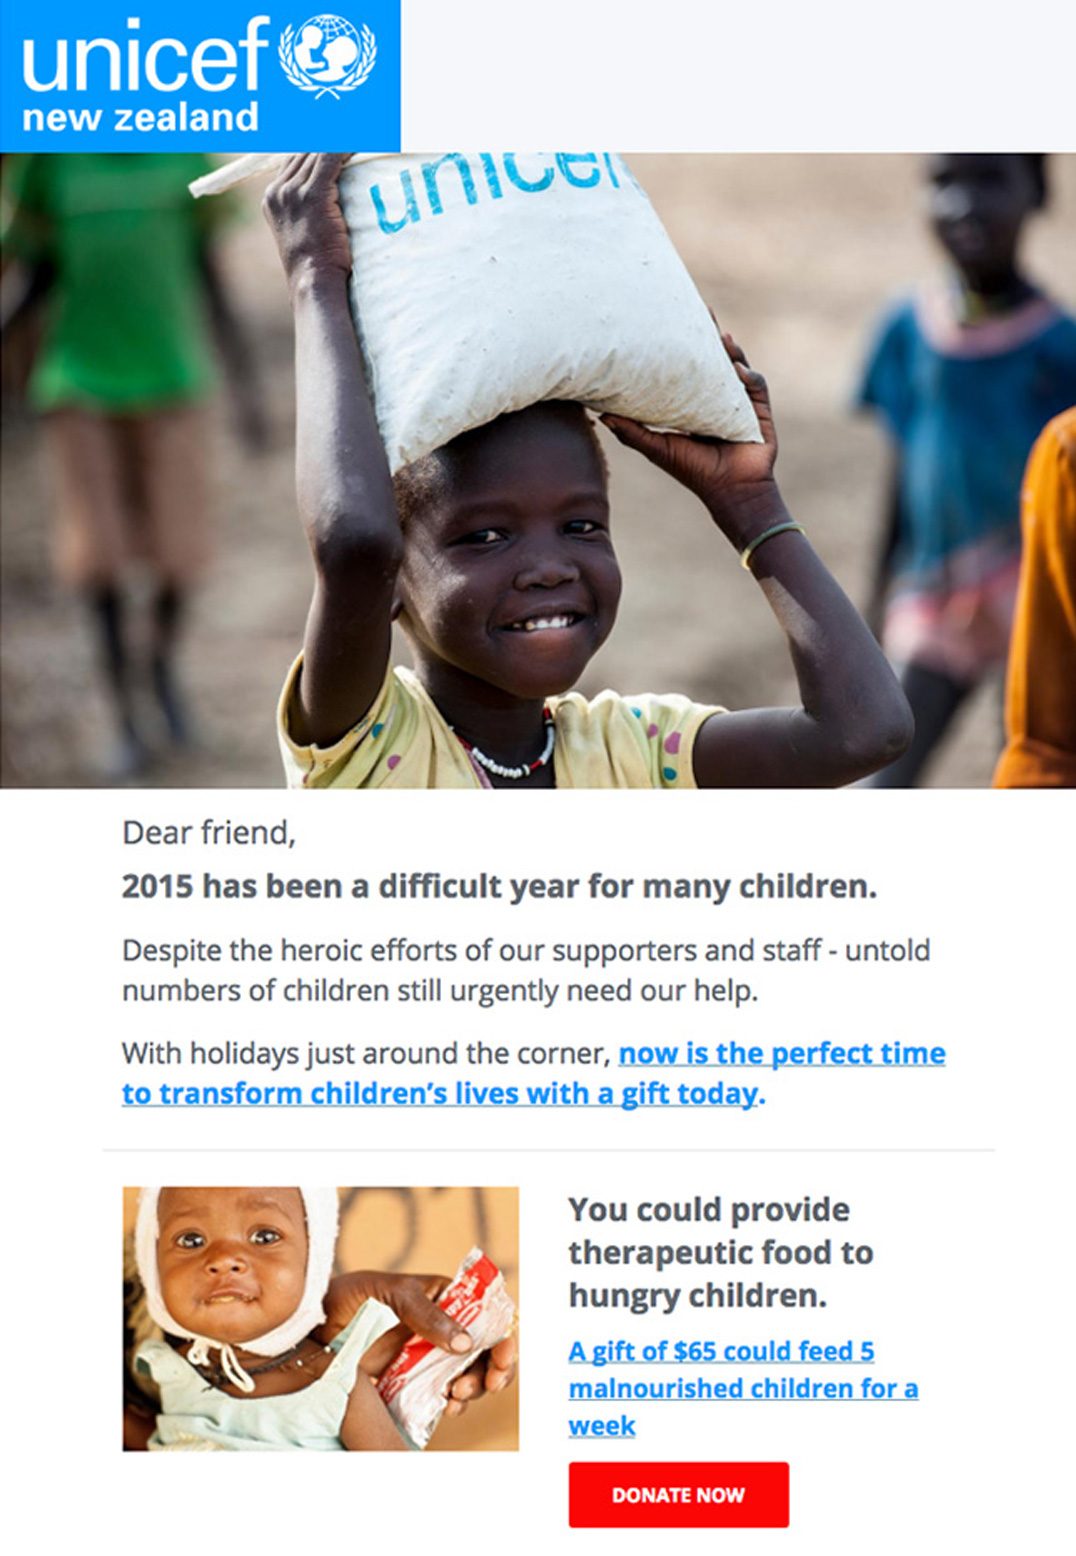 nonprofit email automation examples - unicef email